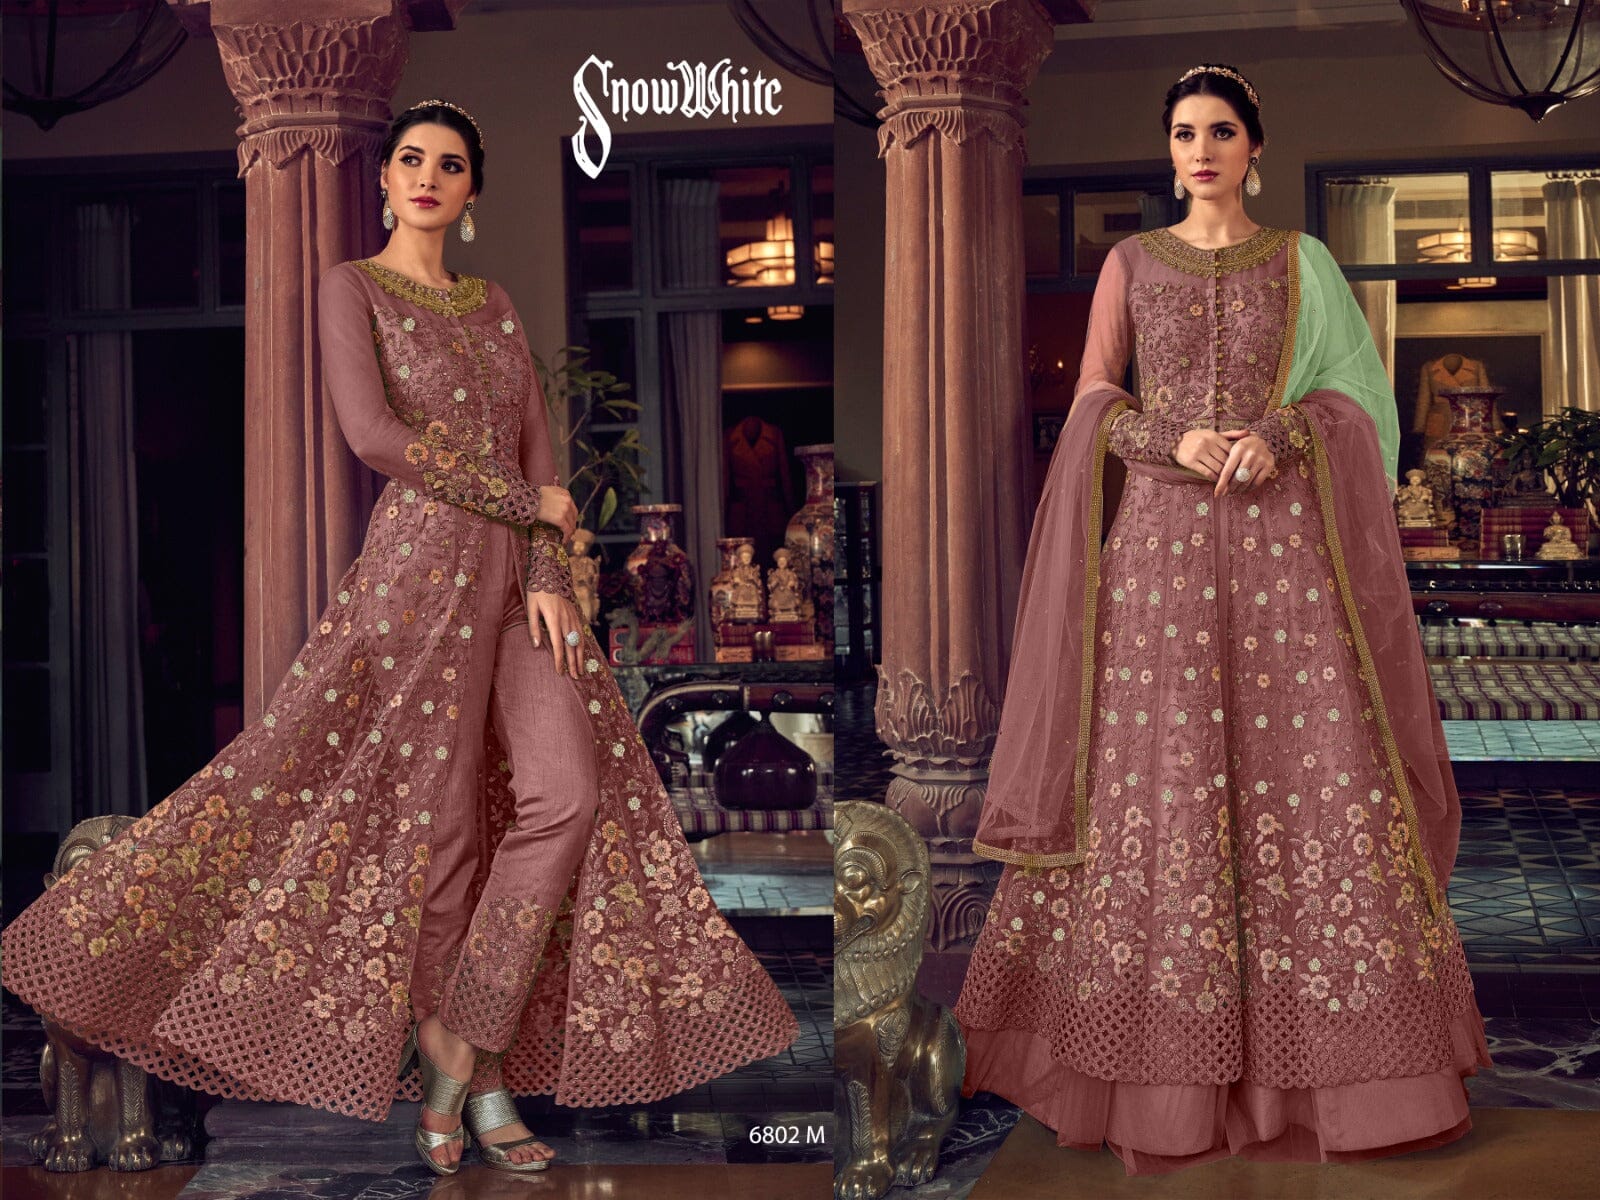 Dusky Pink Butterfly Net Designer Suit with Skirt and Embroidered Pants Designer Suits Shopin Di Apparels 